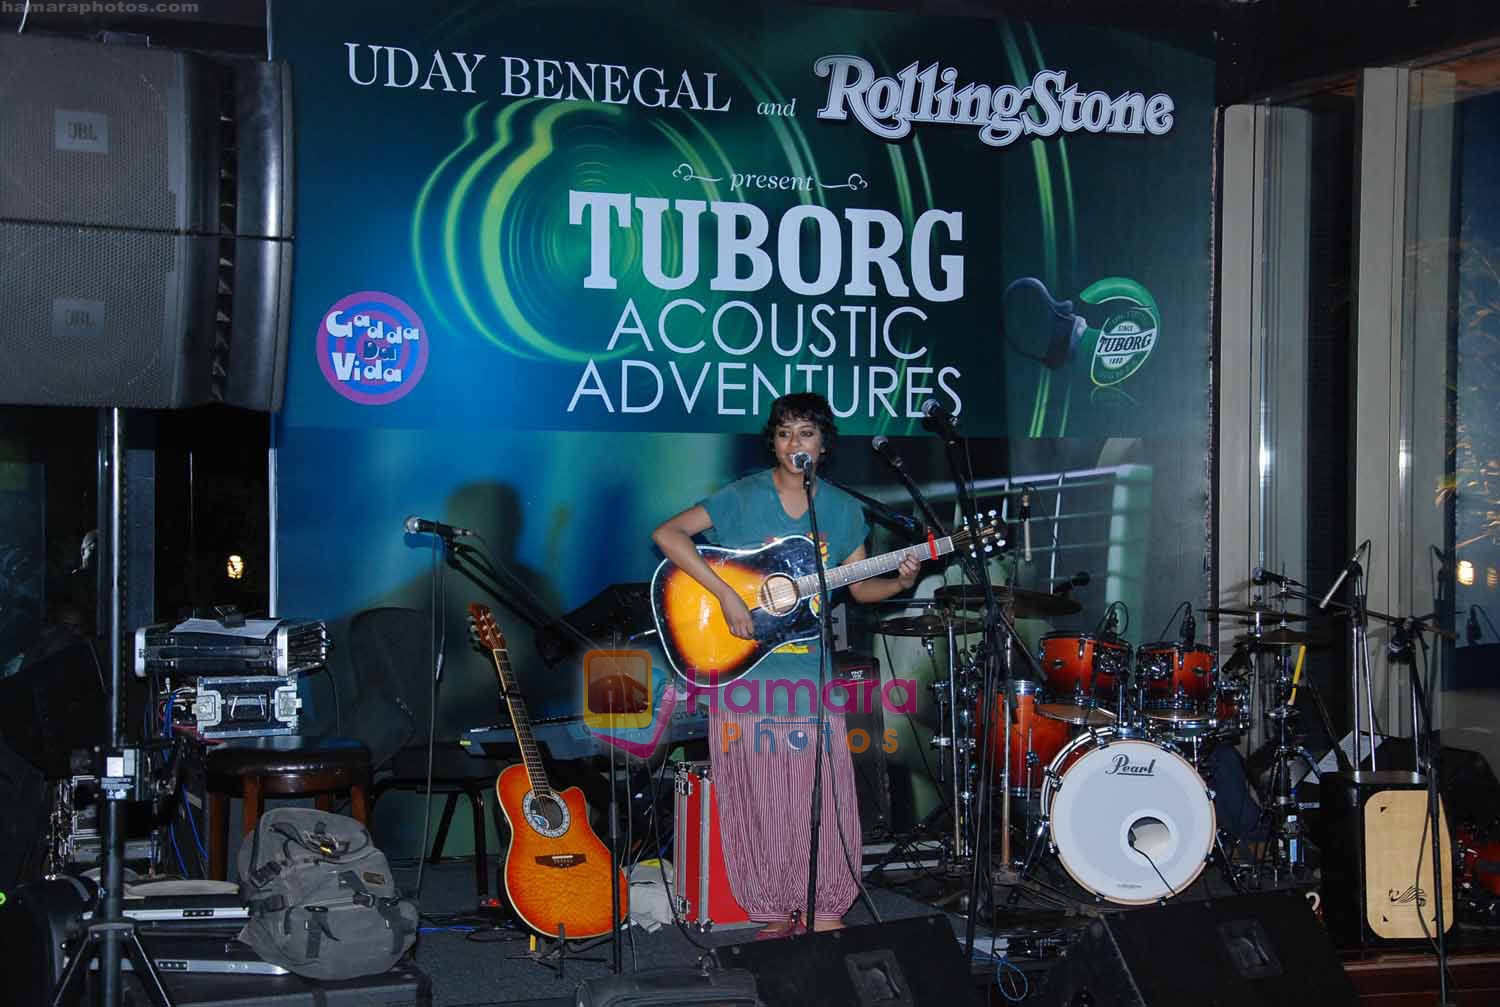 Gouri playing the first note at Uday Benegal's and Rolling Stone India's new venture Tuborg Acoustic Adventures in Gadda Da Vida � the lounge bar at Novotel Mumbai Juhu Beach on 17th Sep 2009